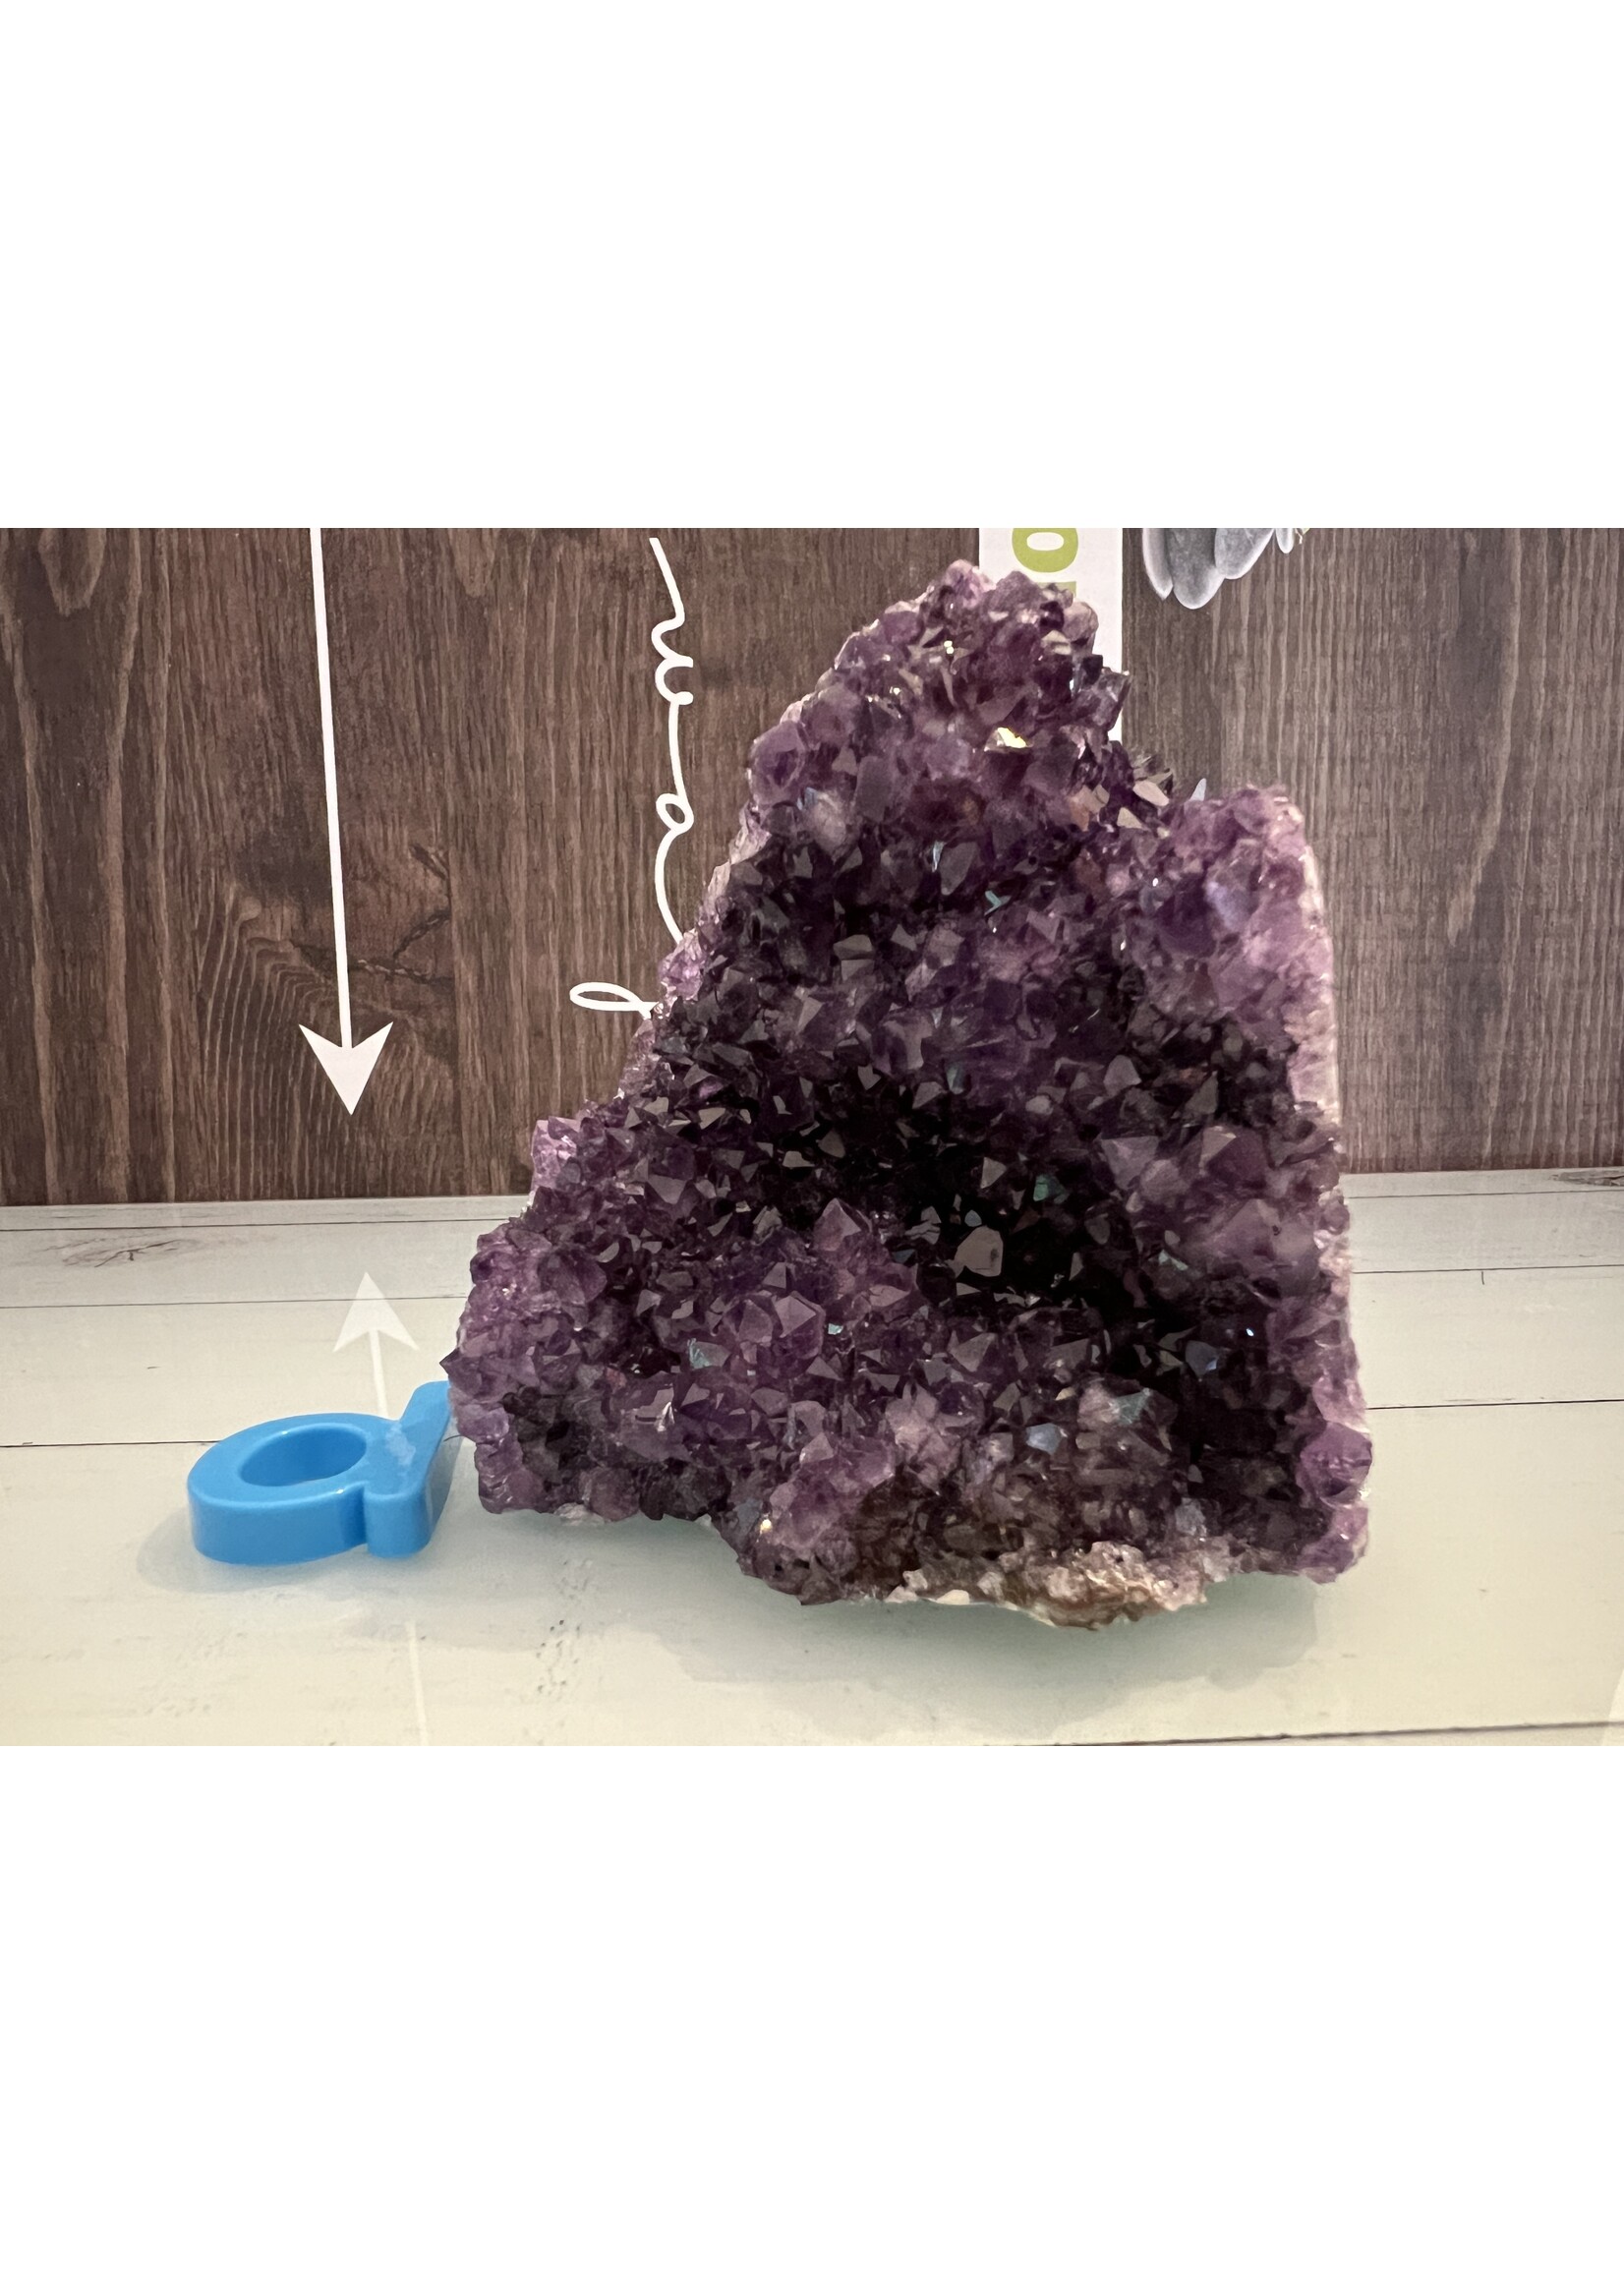 Exquisite Brazilian Amethyst Geode of Great Quality- Promoting Spiritual Upliftment, Concentration, and Meditation